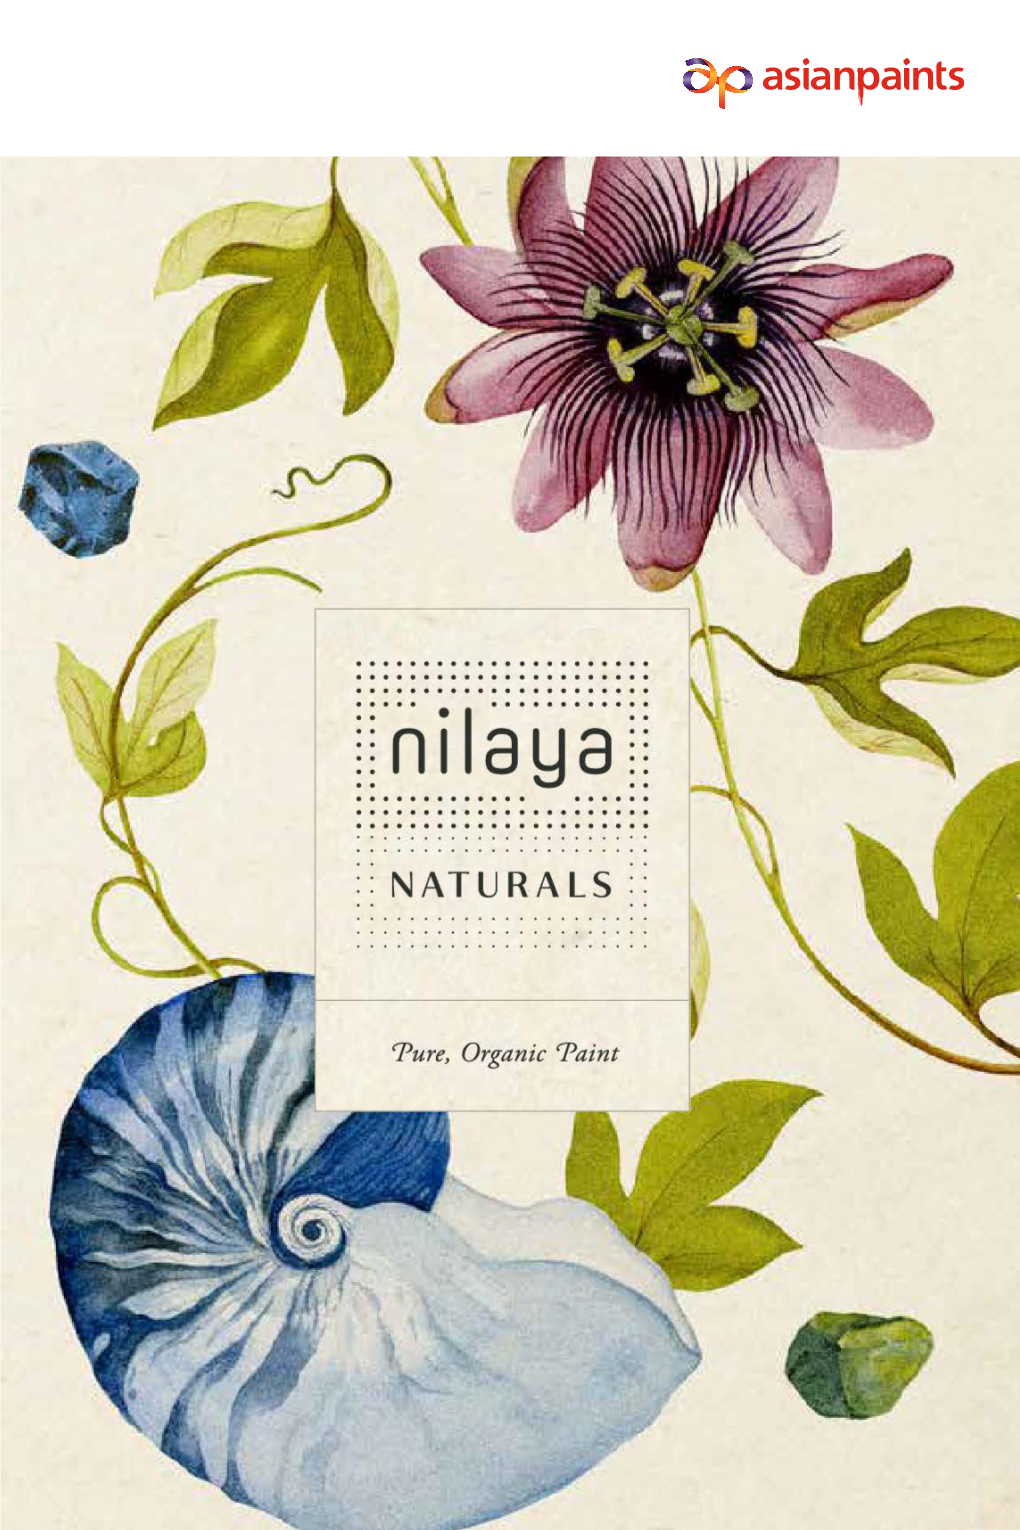 The Unique Colour Experience of Nilaya Naturals